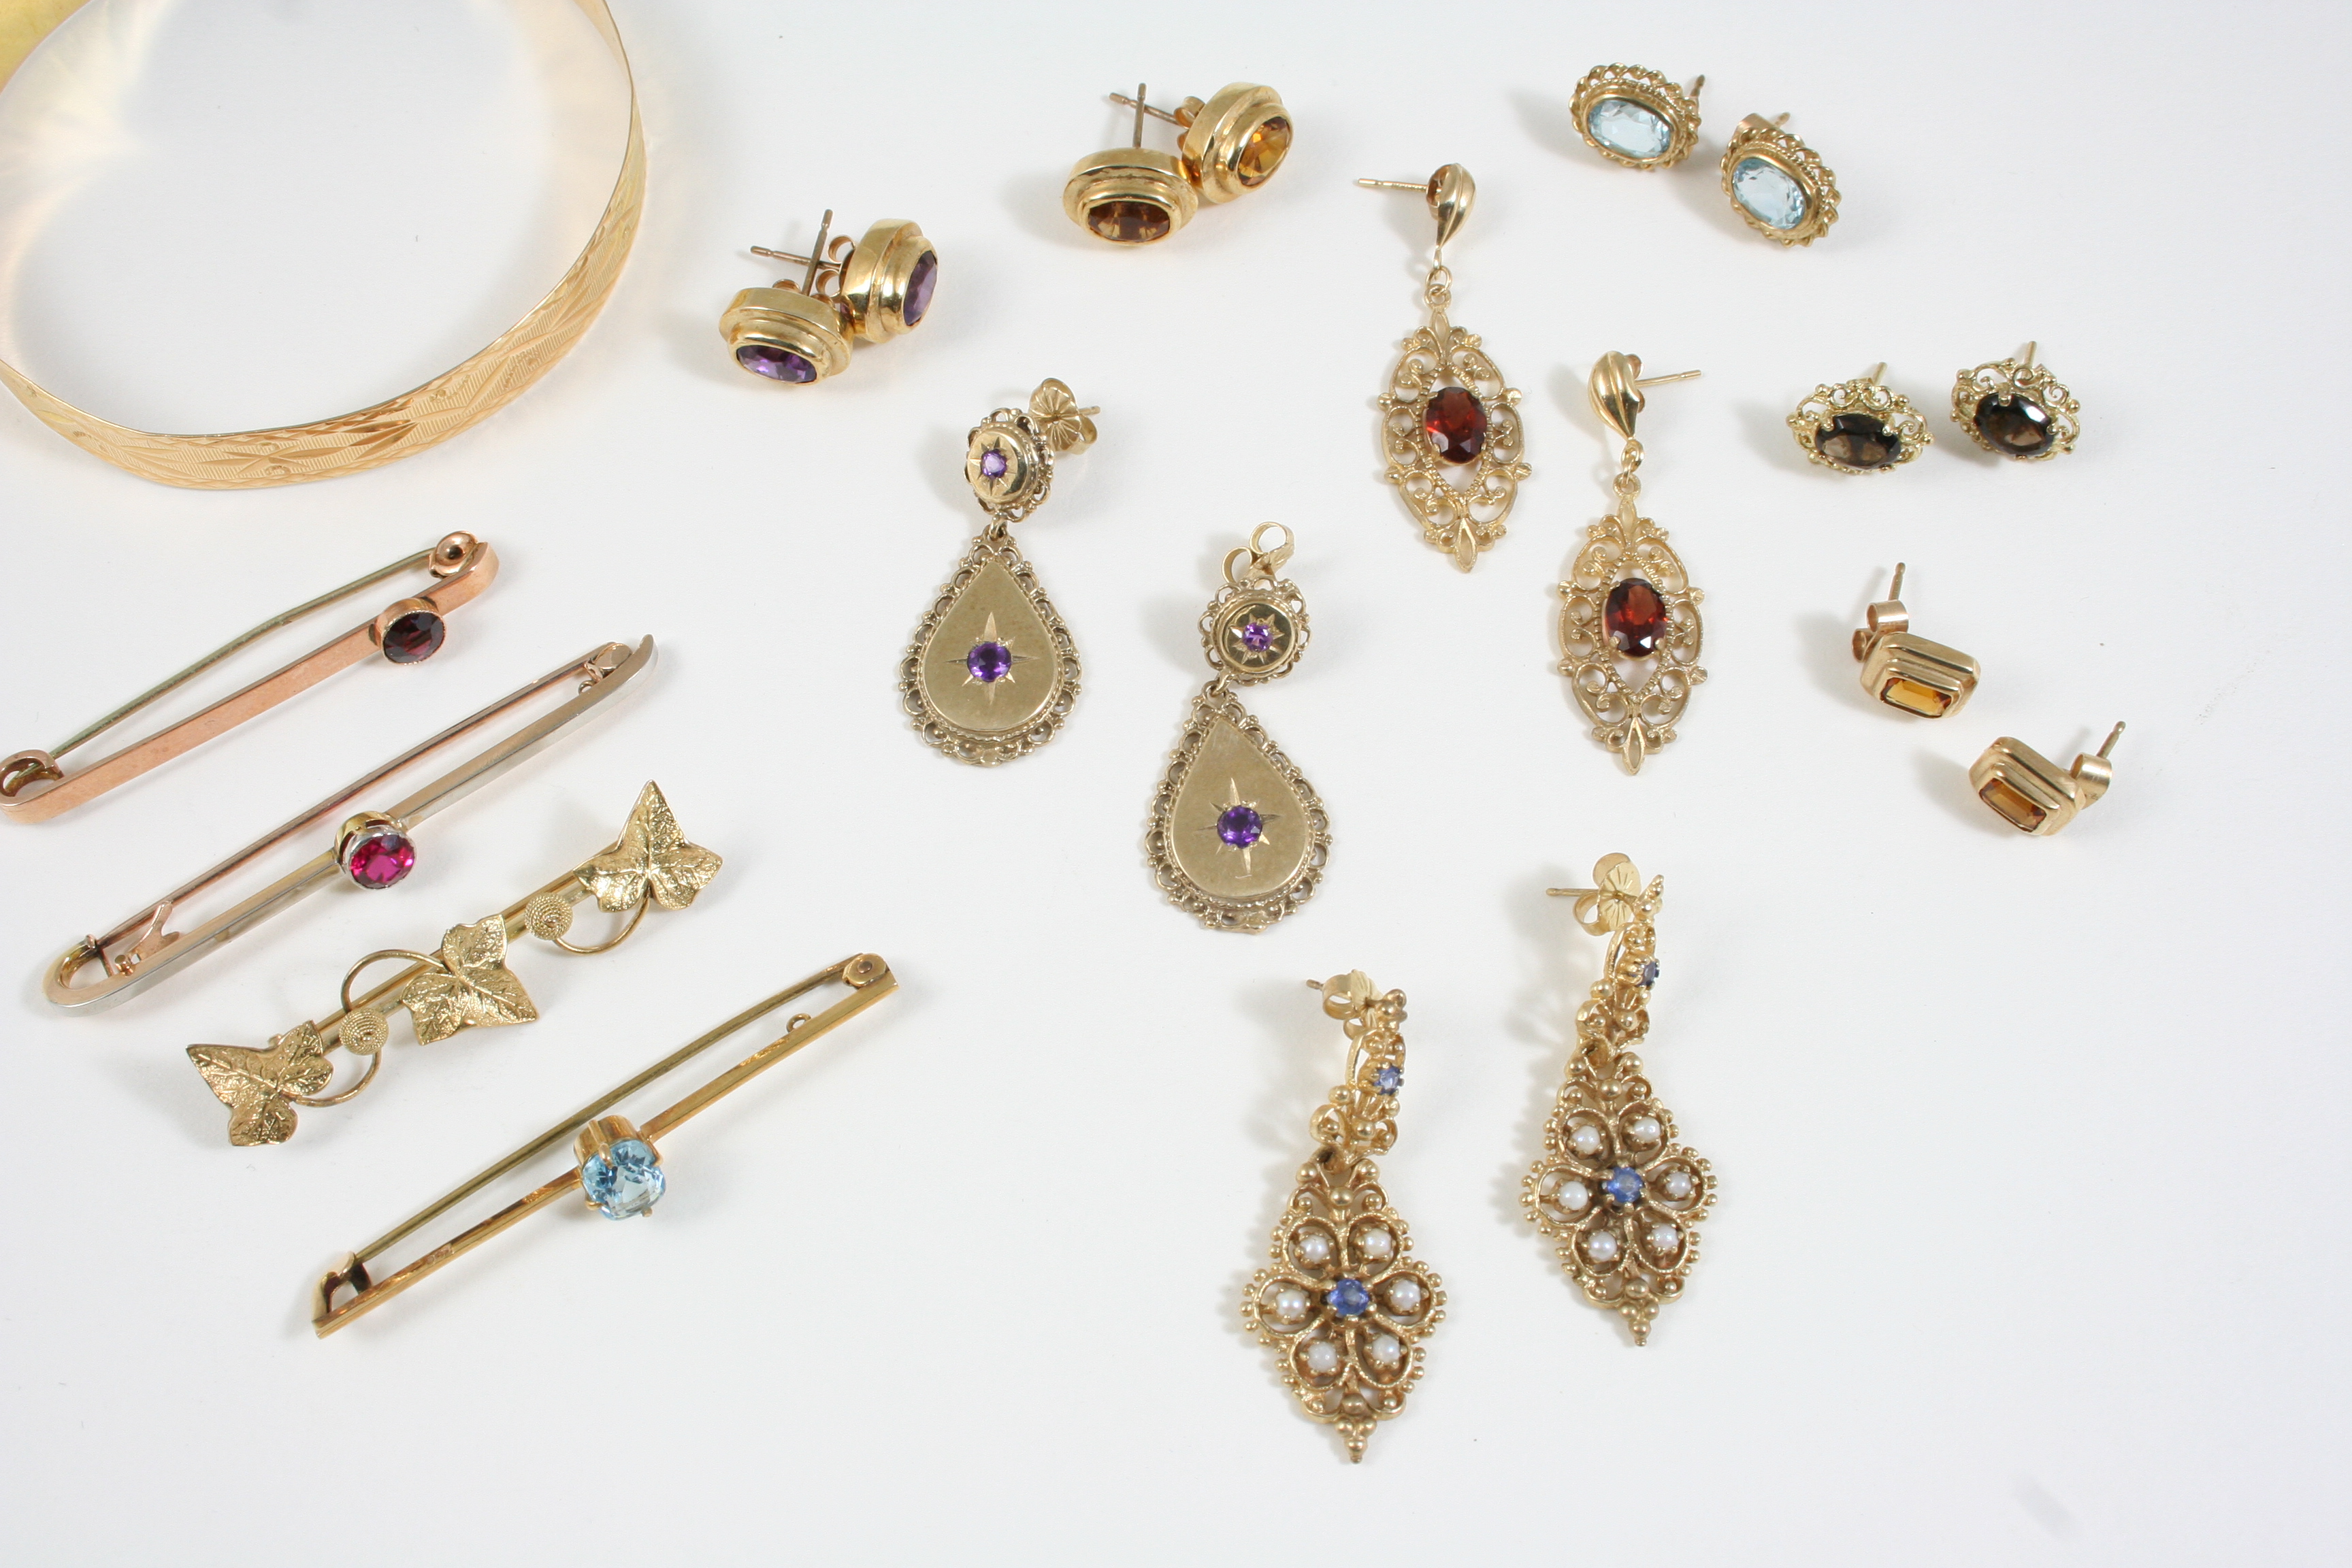 A QUANTITY OF JEWELLERY including a pair of gold drop earrings set with amethysts, a pair of